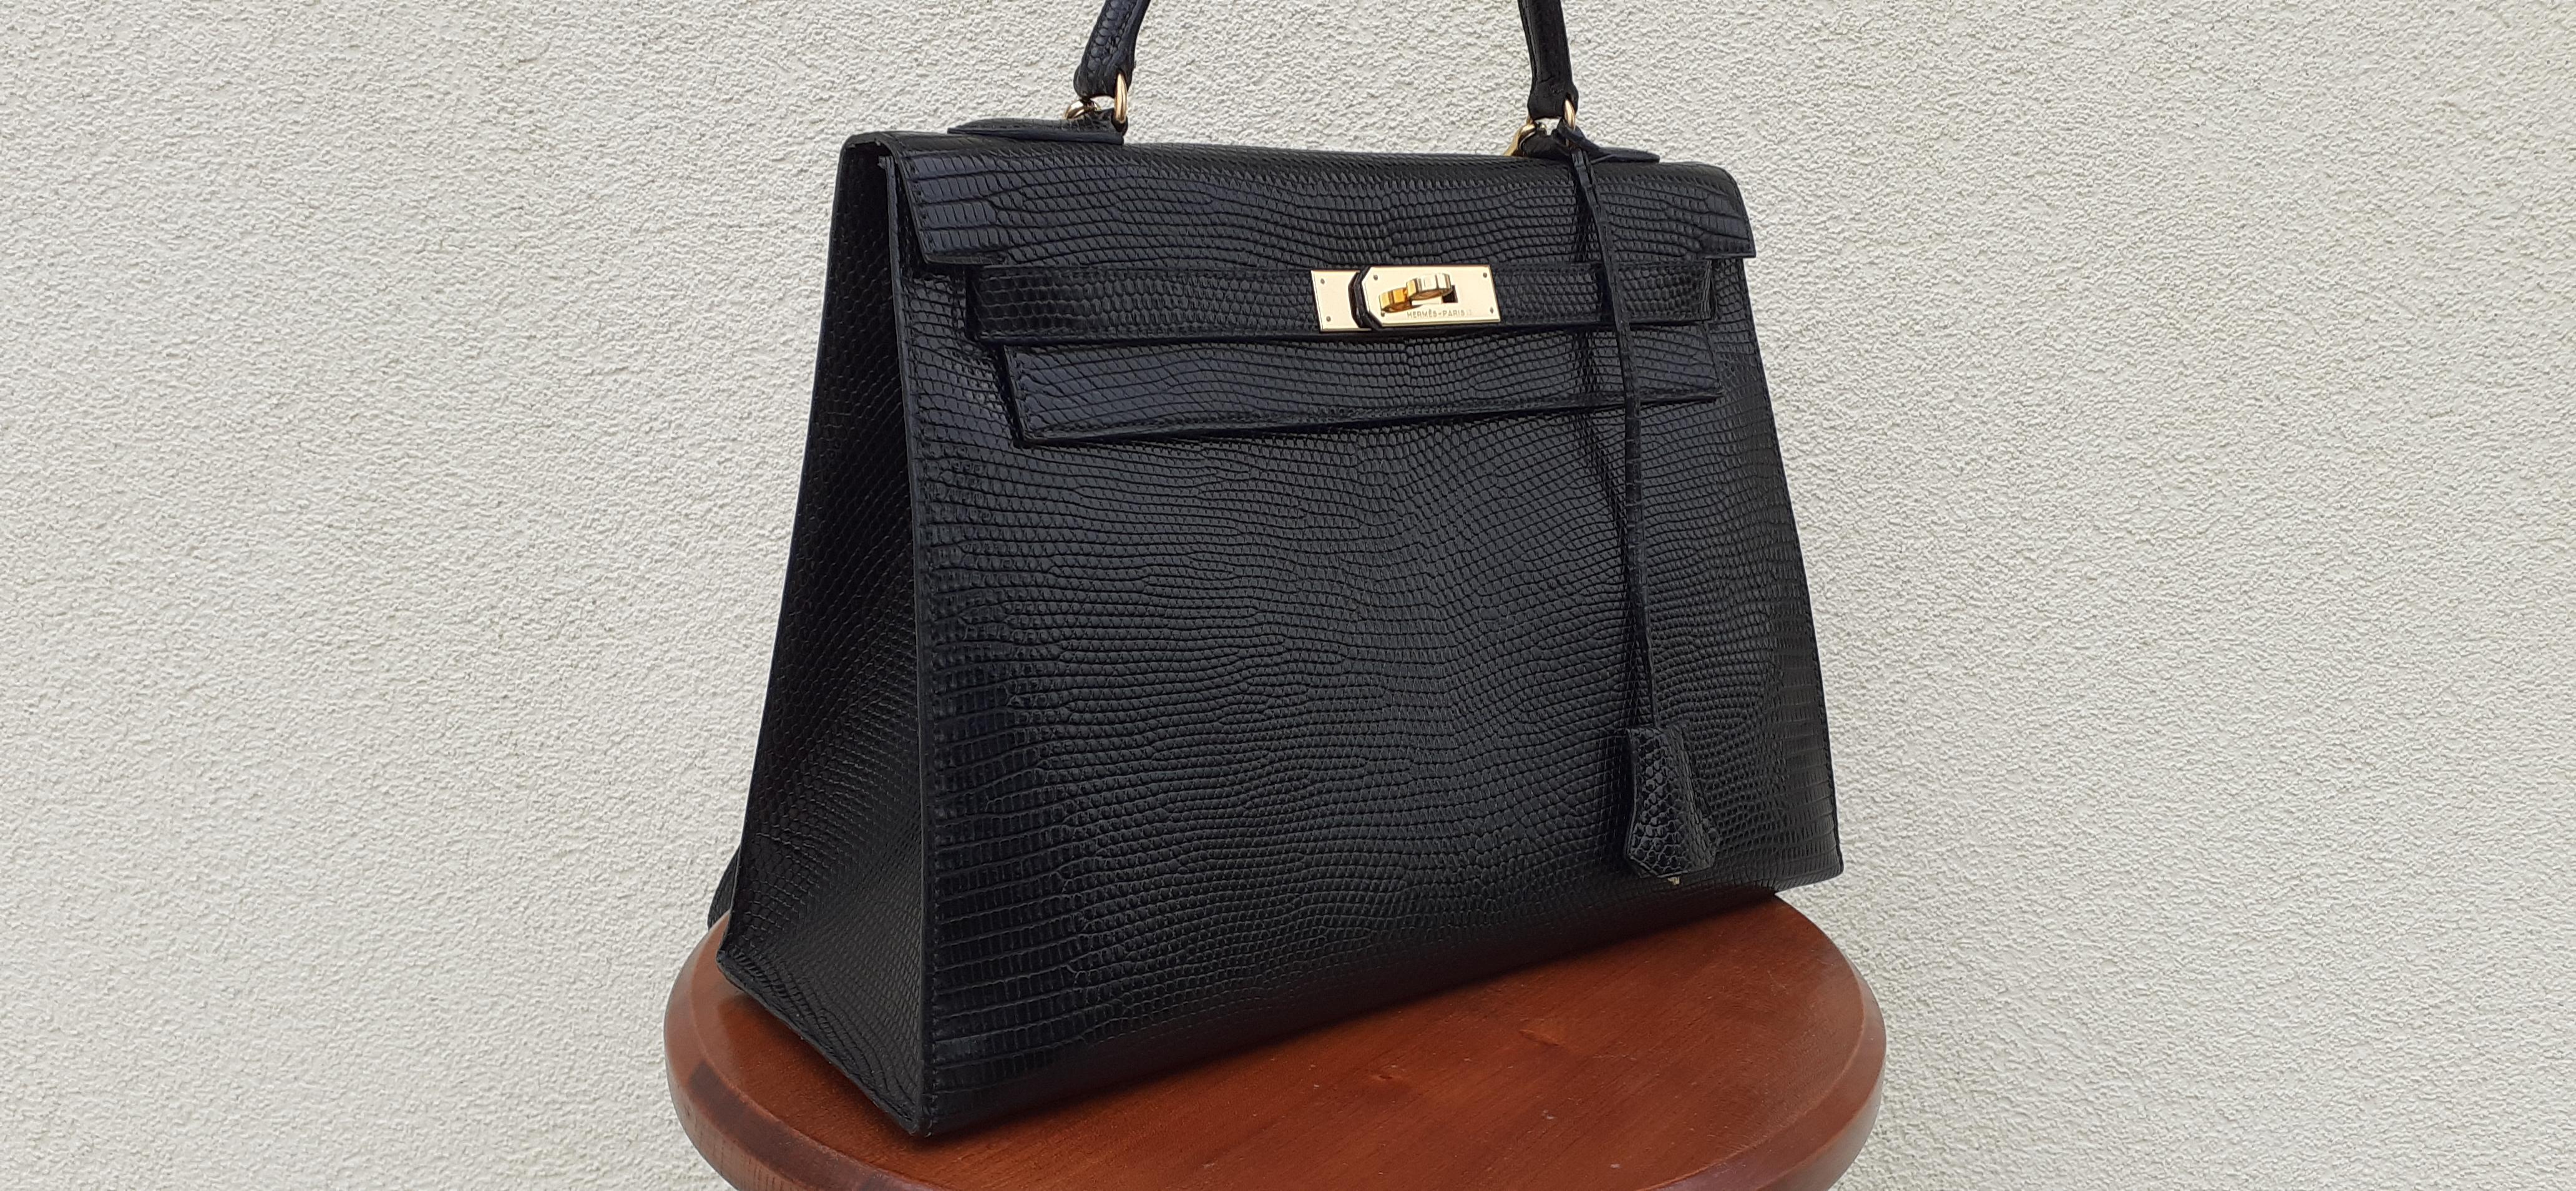 Exceptional Hermès Sellier Kelly Bag Black Lizard and Golden Hdw RARE For Sale 8